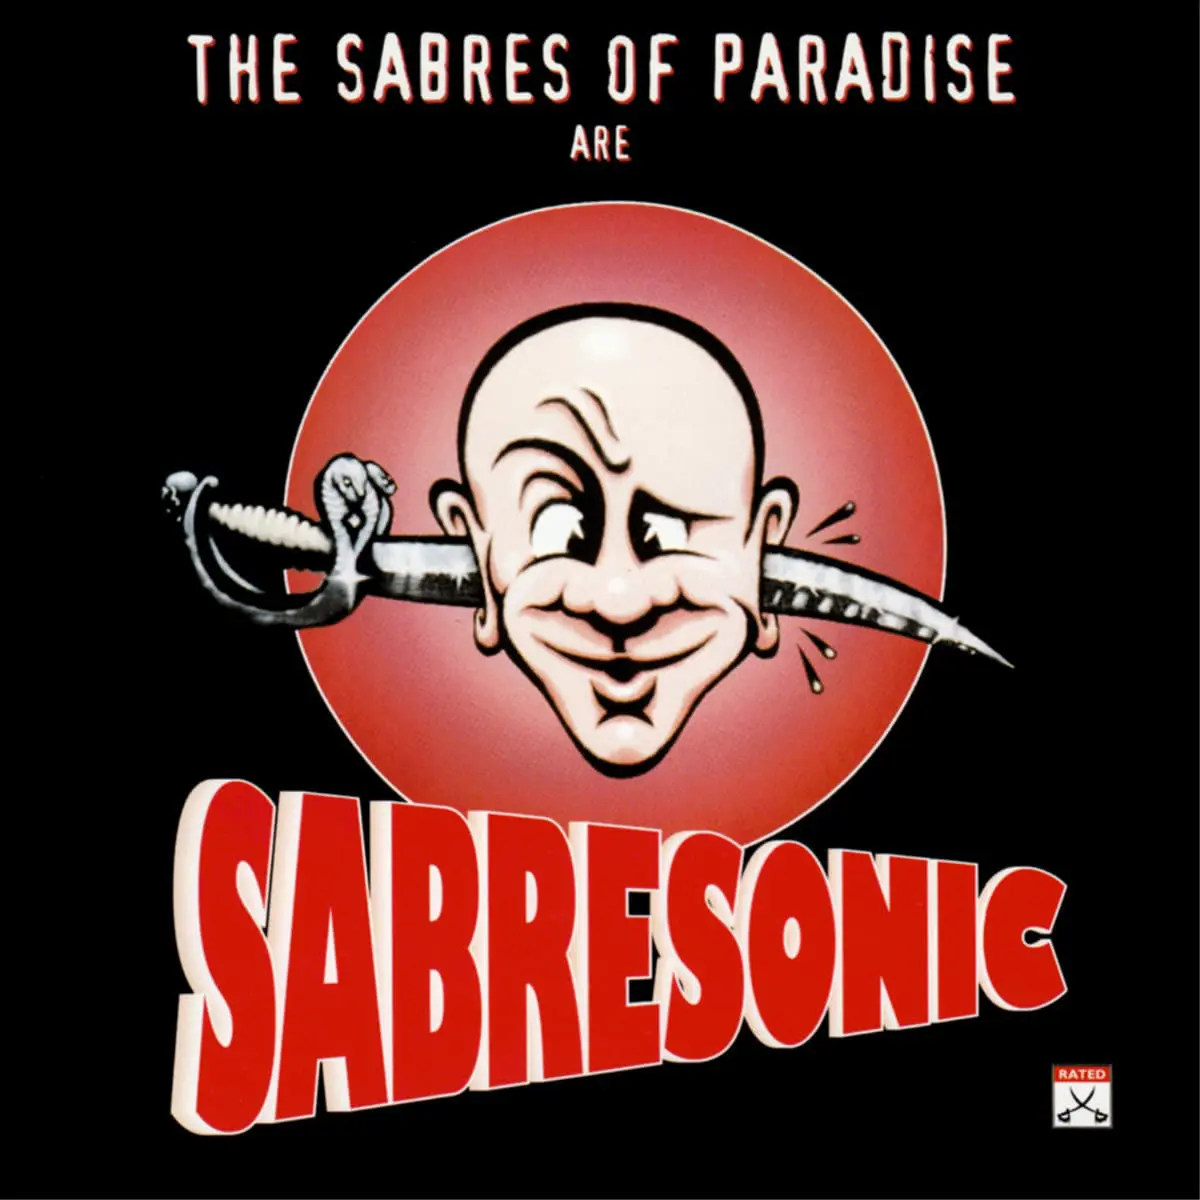 Sabres Of Paradise - Sabresonic